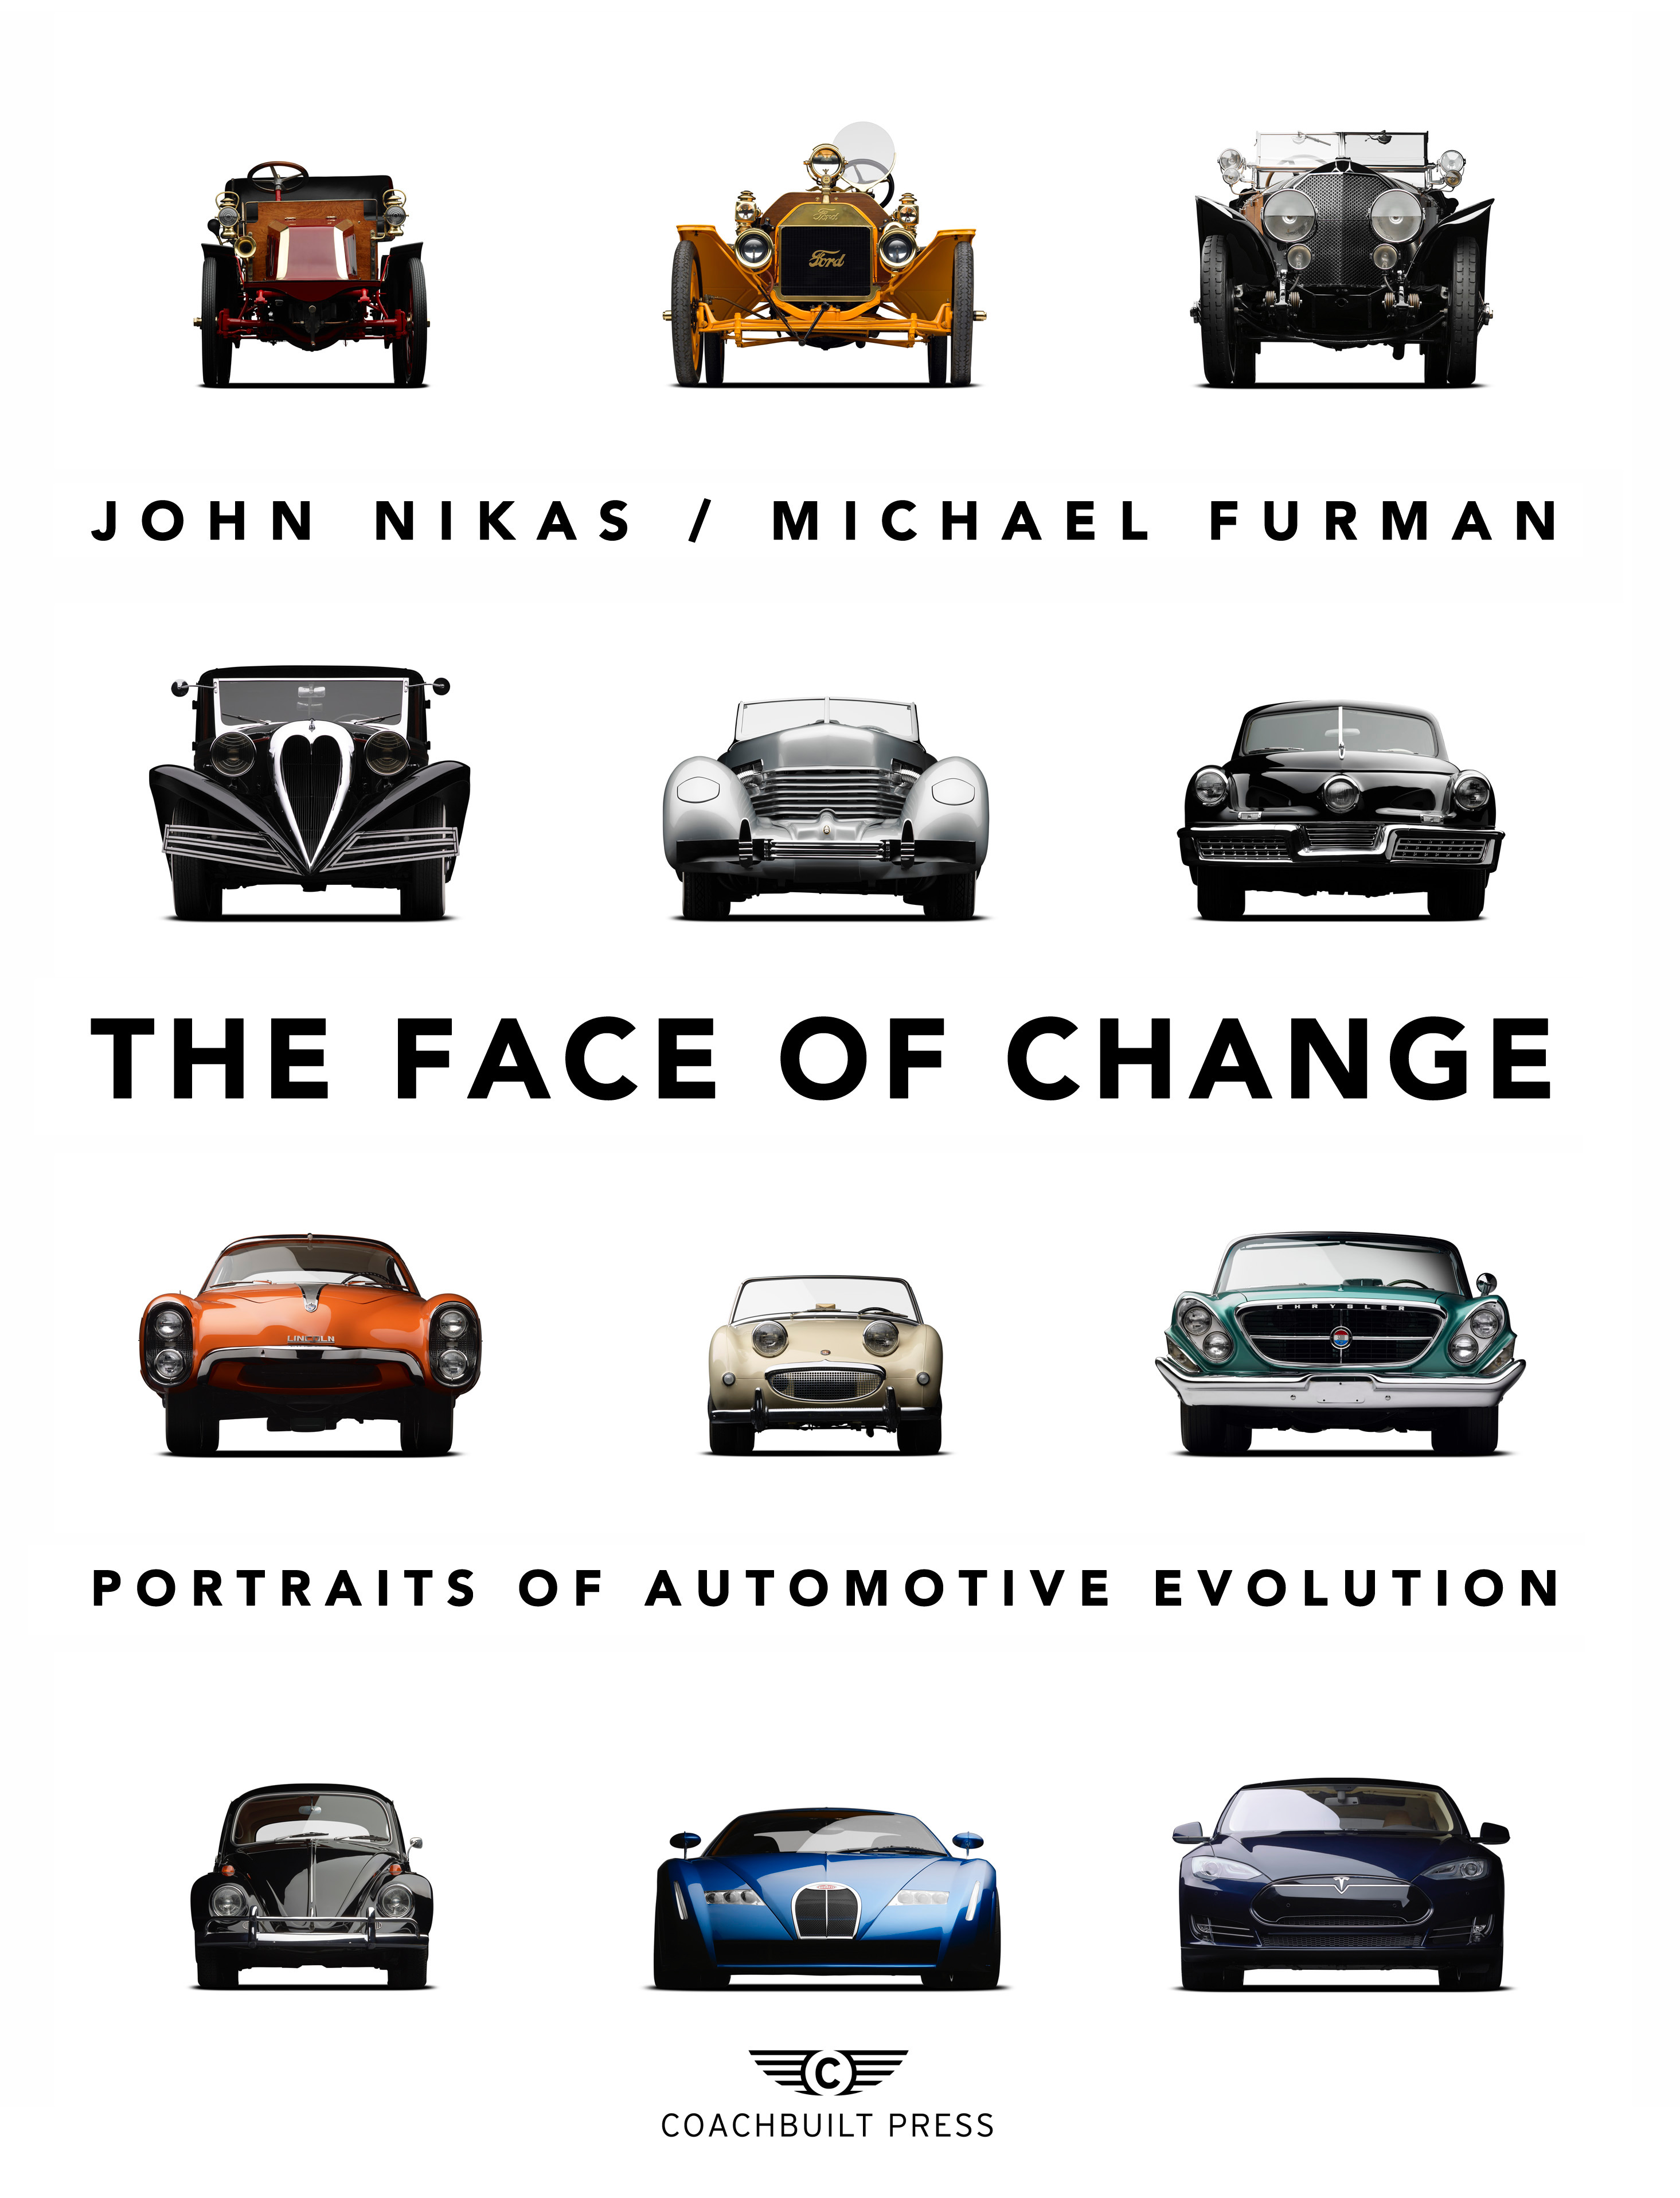 Michael Furman, Book presents ‘face time’ with Michael Furman, ClassicCars.com Journal